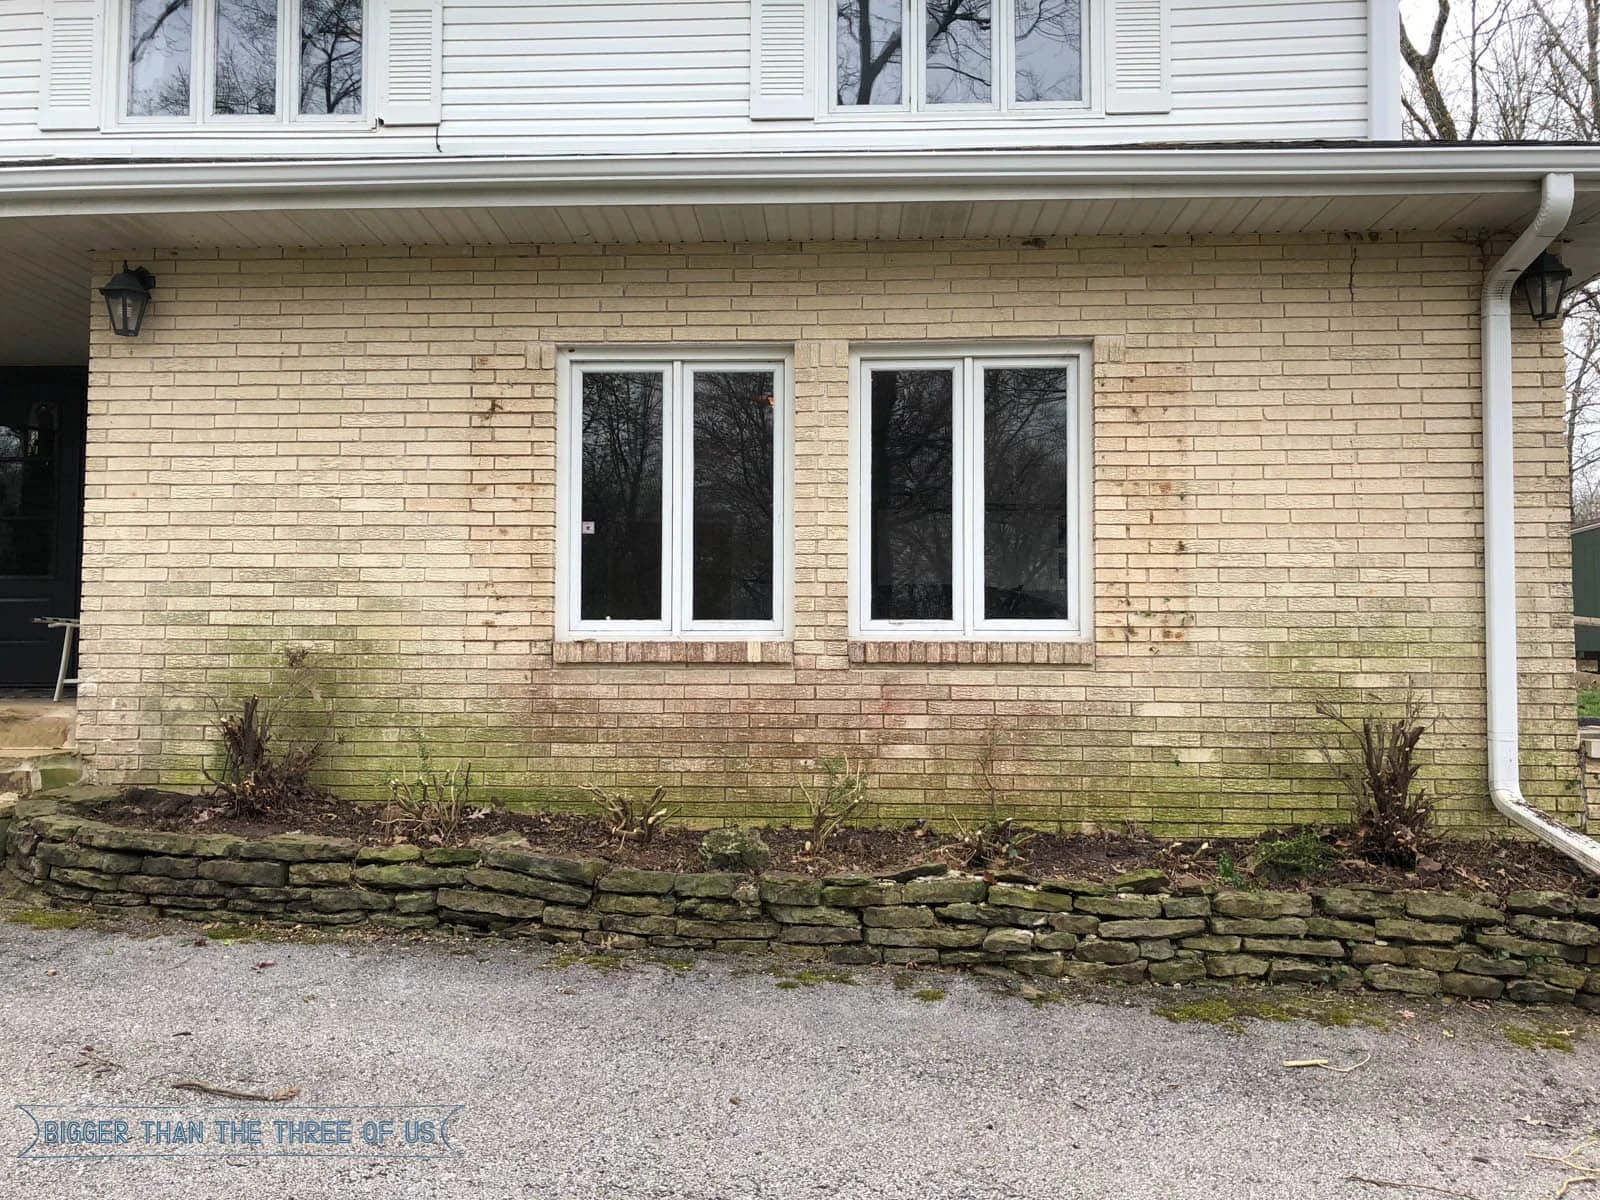 Have you ever thought about how much improvement you can make on the exterior of your home by trimming overgrown boxwood bushes back? Seriously, it's a game changer over here. Come over and see the process of trimming big boxwoods and how the shutter removal before and after. #exterior #beforeandafter #shutterremoval 